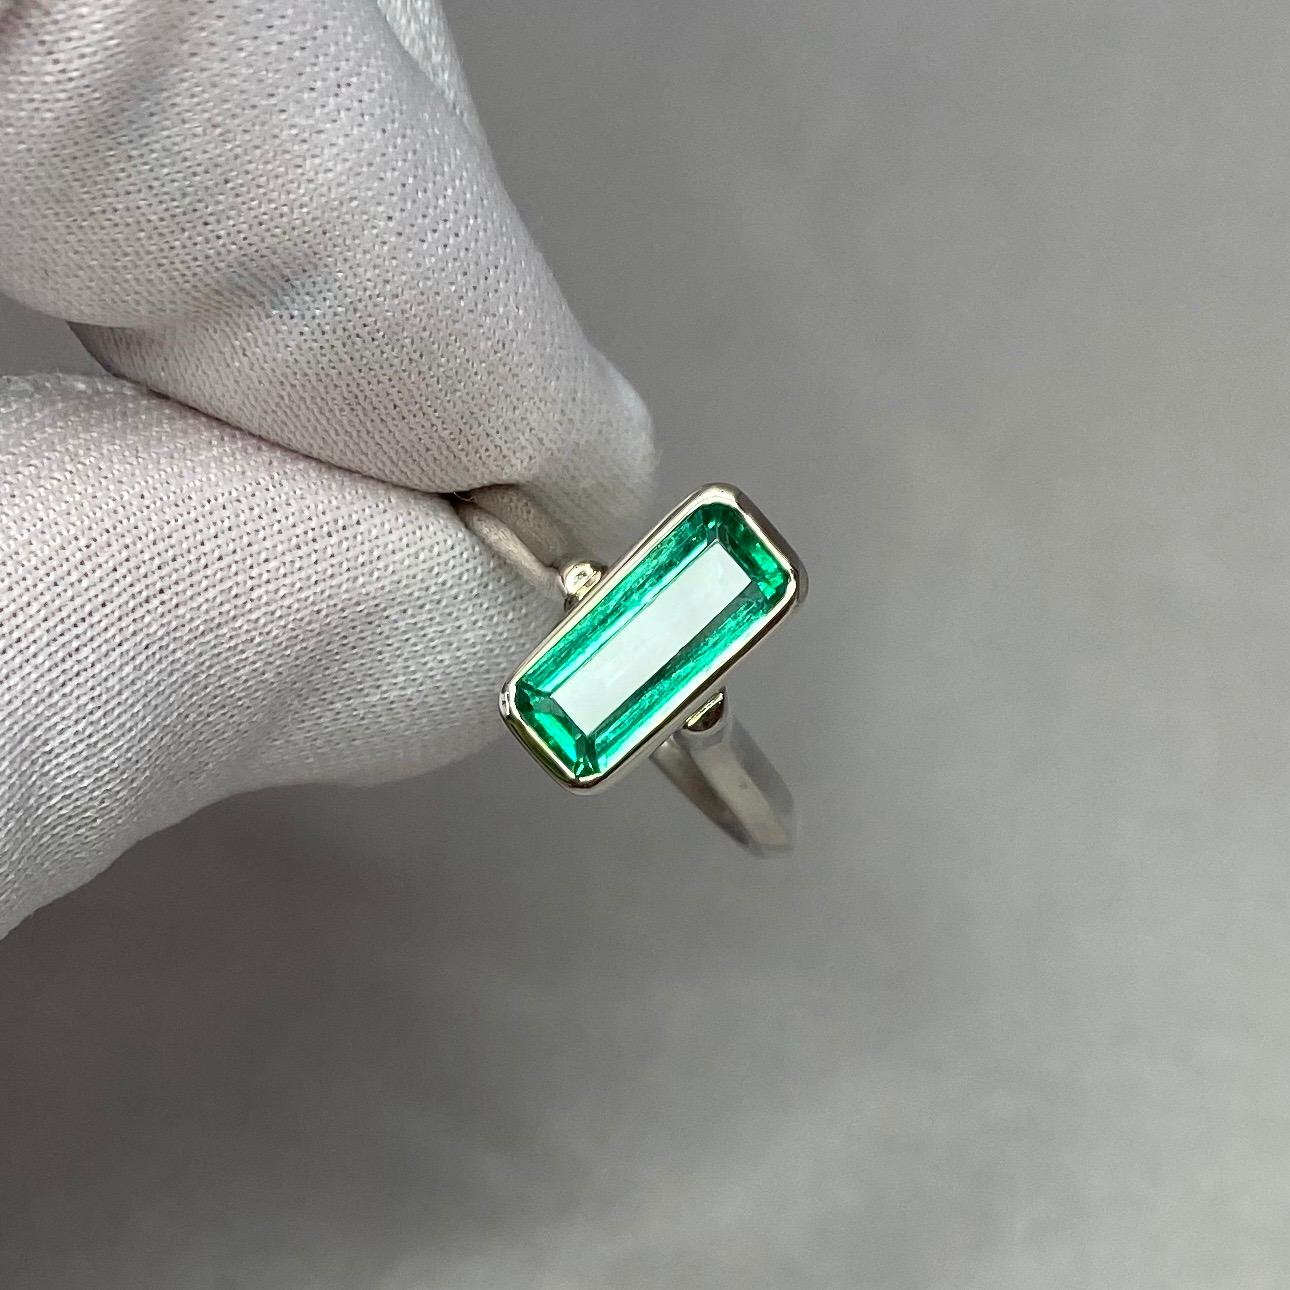 Fine Natural Vivid Green Colombian Emerald 18K White Gold Ring.

Stunning 1.76 carat stone with a fine vivid green colour. Top grade stone with exceptional clarity. Very clean stone, particularly by emerald standards.
The colour on this emerald is